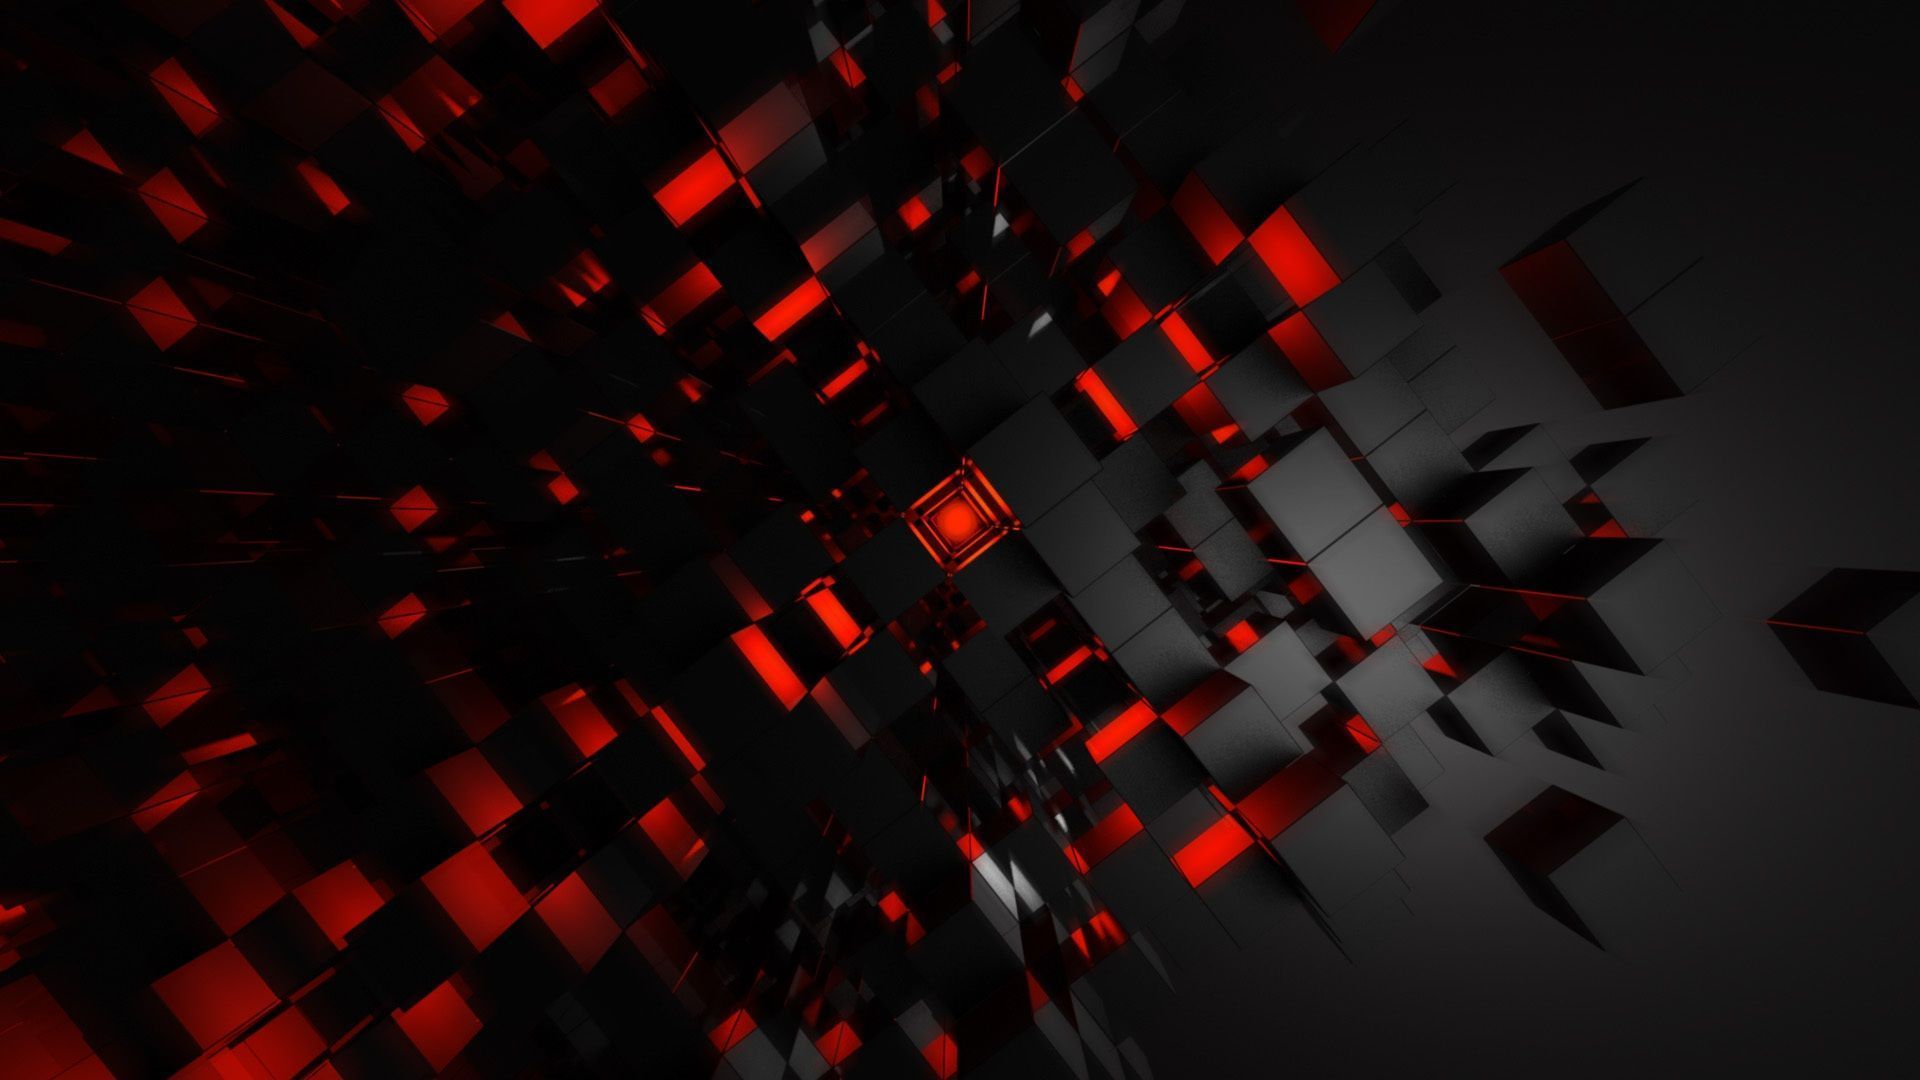 Black And Red Abstract Wallpaper 21 - 1920x1080